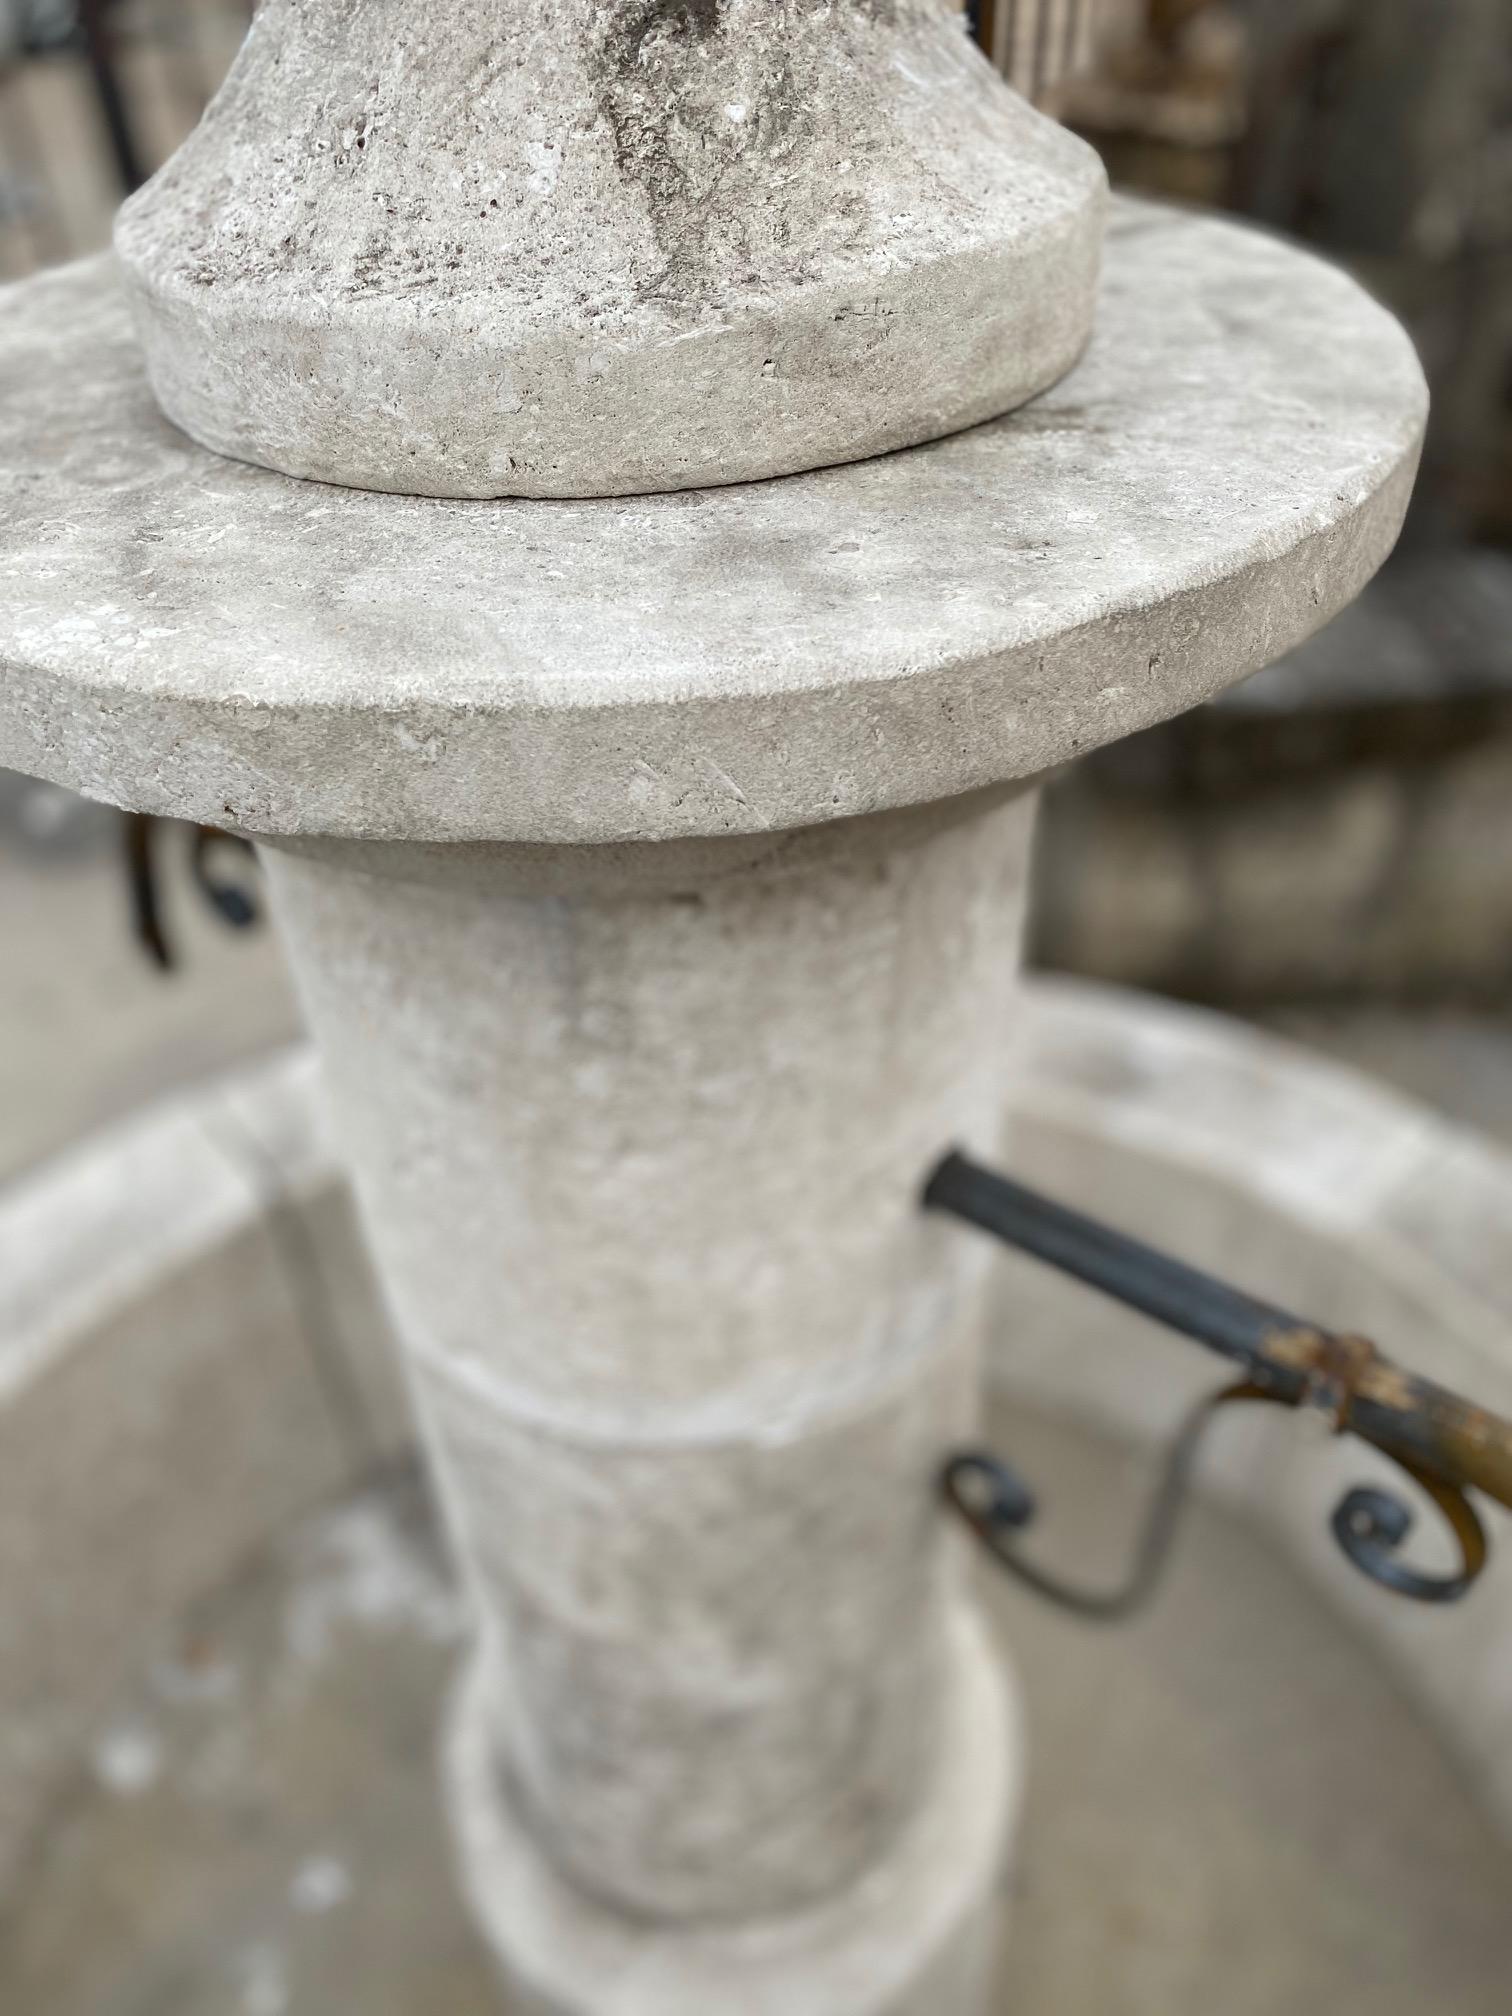 Here we offer a hand carved limestone central fountain with two brass down spouts. This fountain has a large, deep basin and will provide the acoustics of an old world fountain to your courtyard. The design is simplistic and straight lined therefore